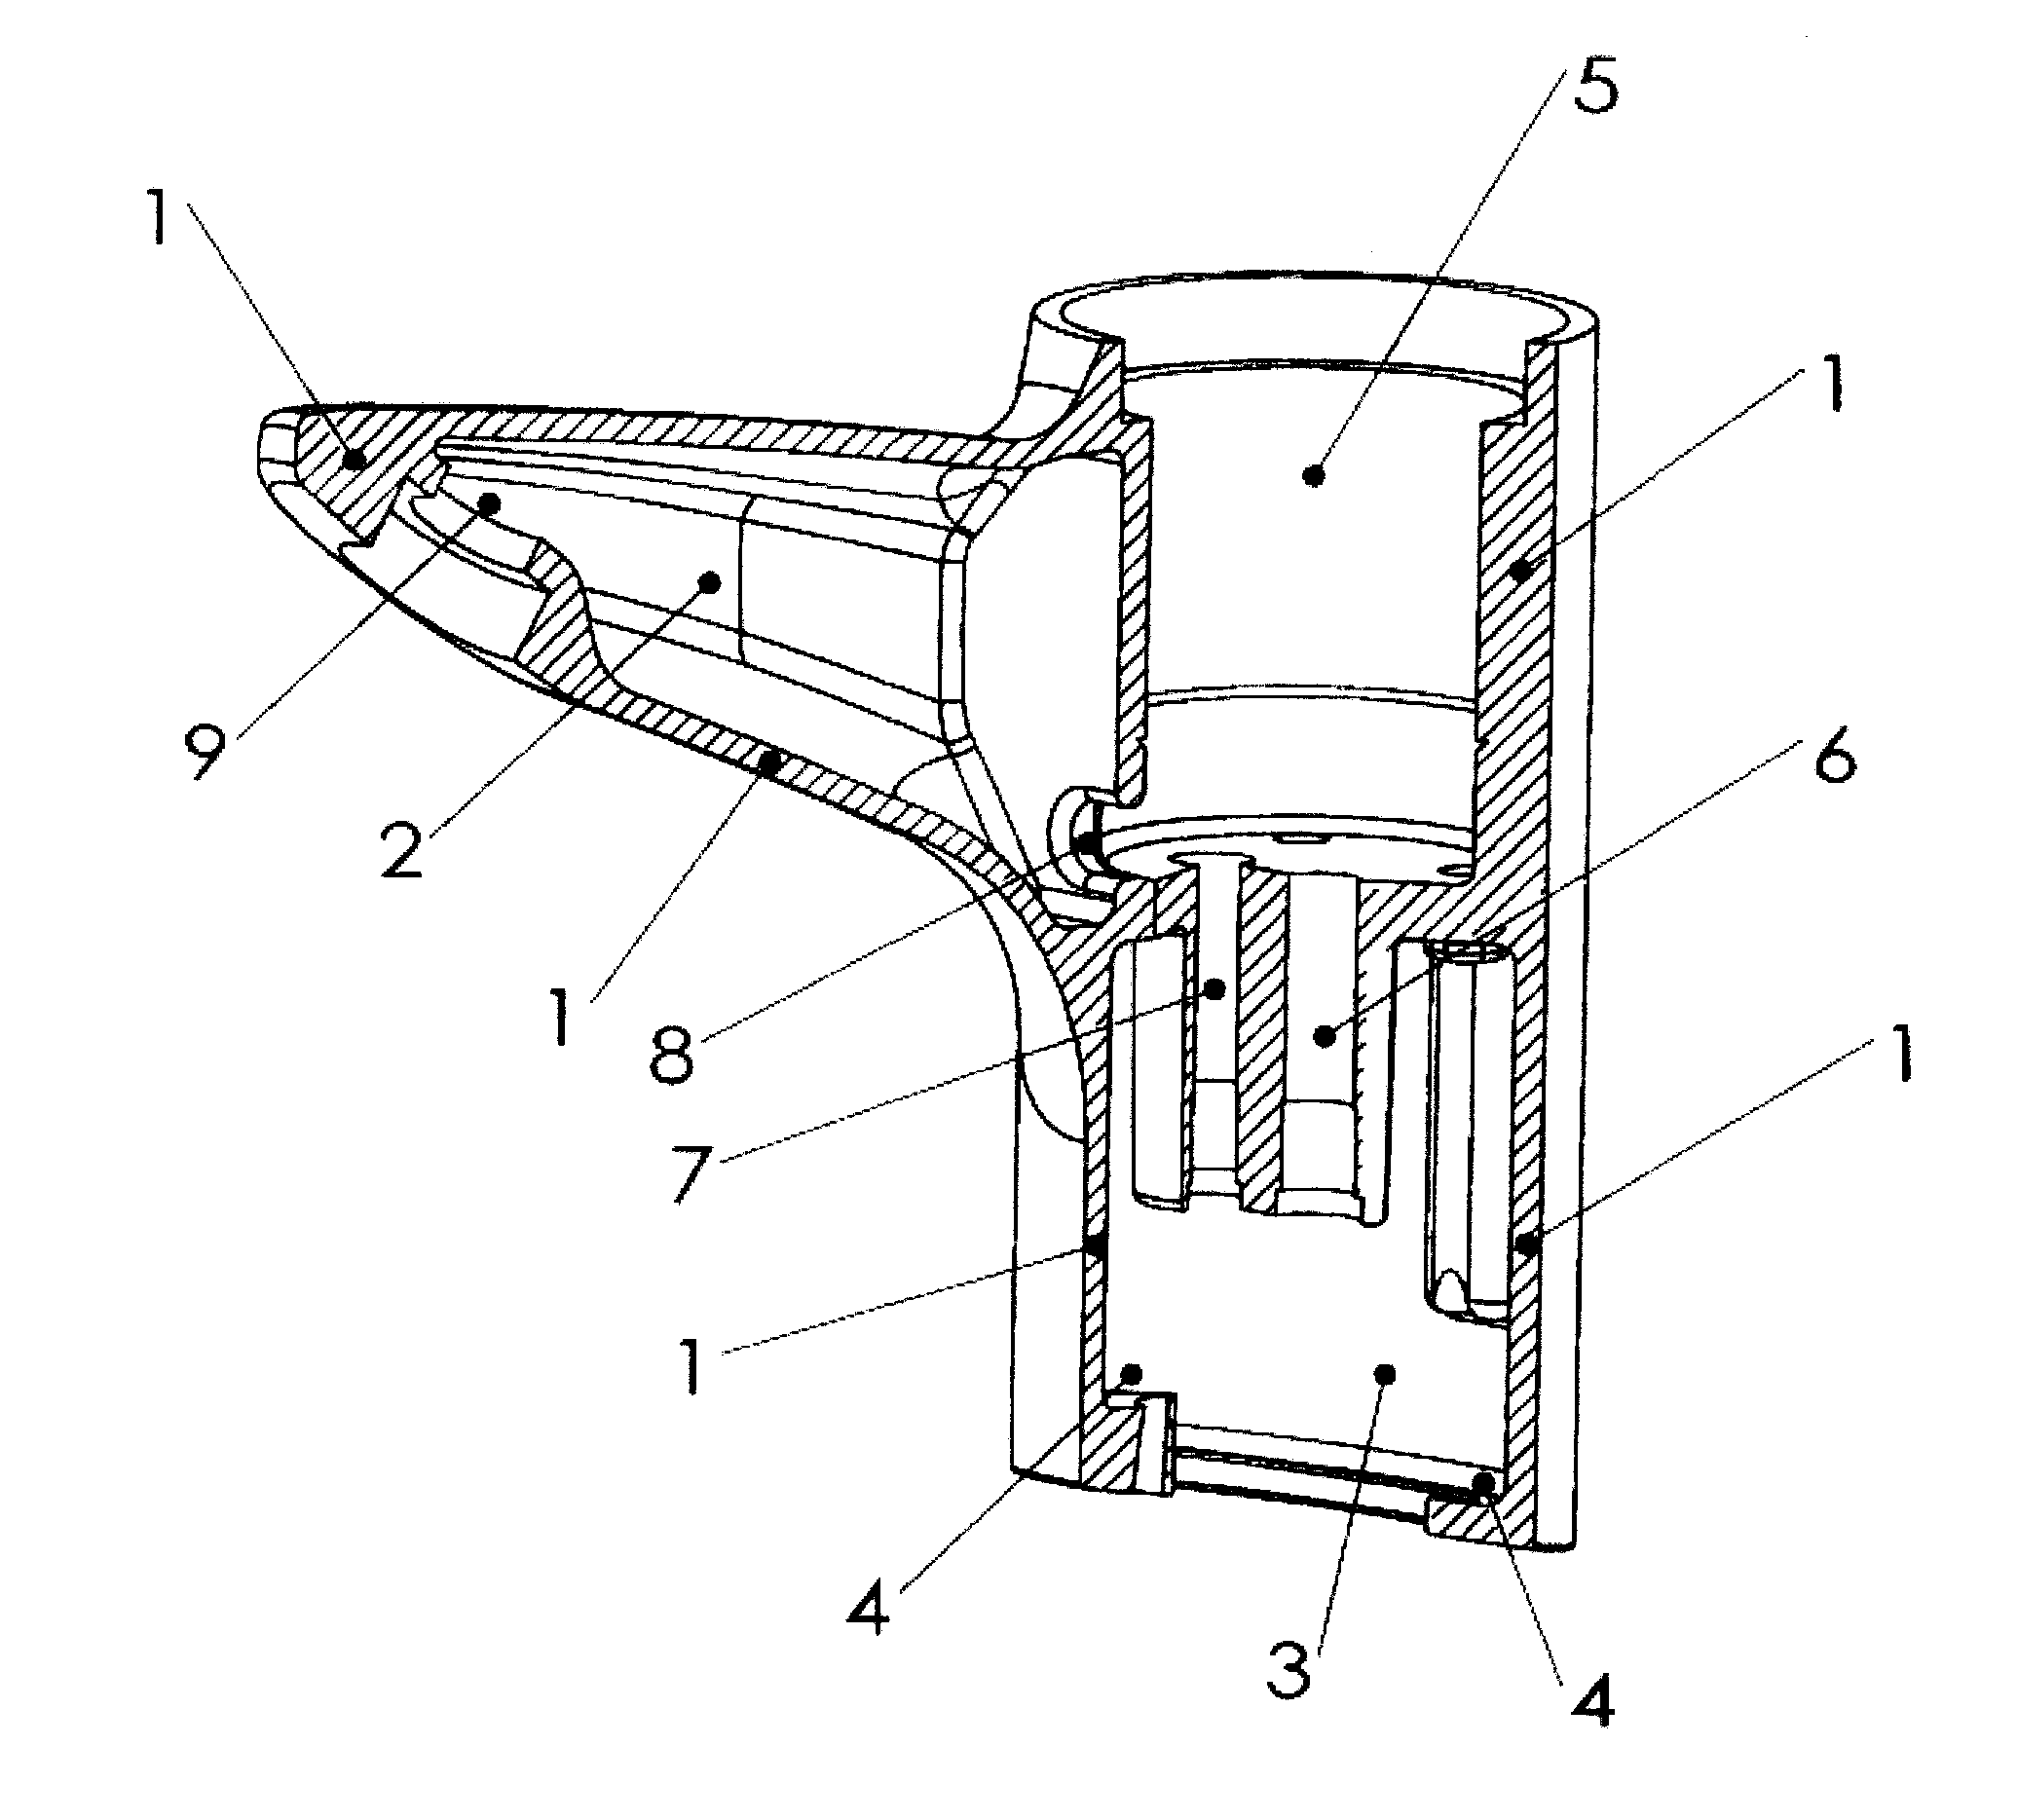 Methods and apparatus for manufacturing metal components with ceramic injection molding core structures